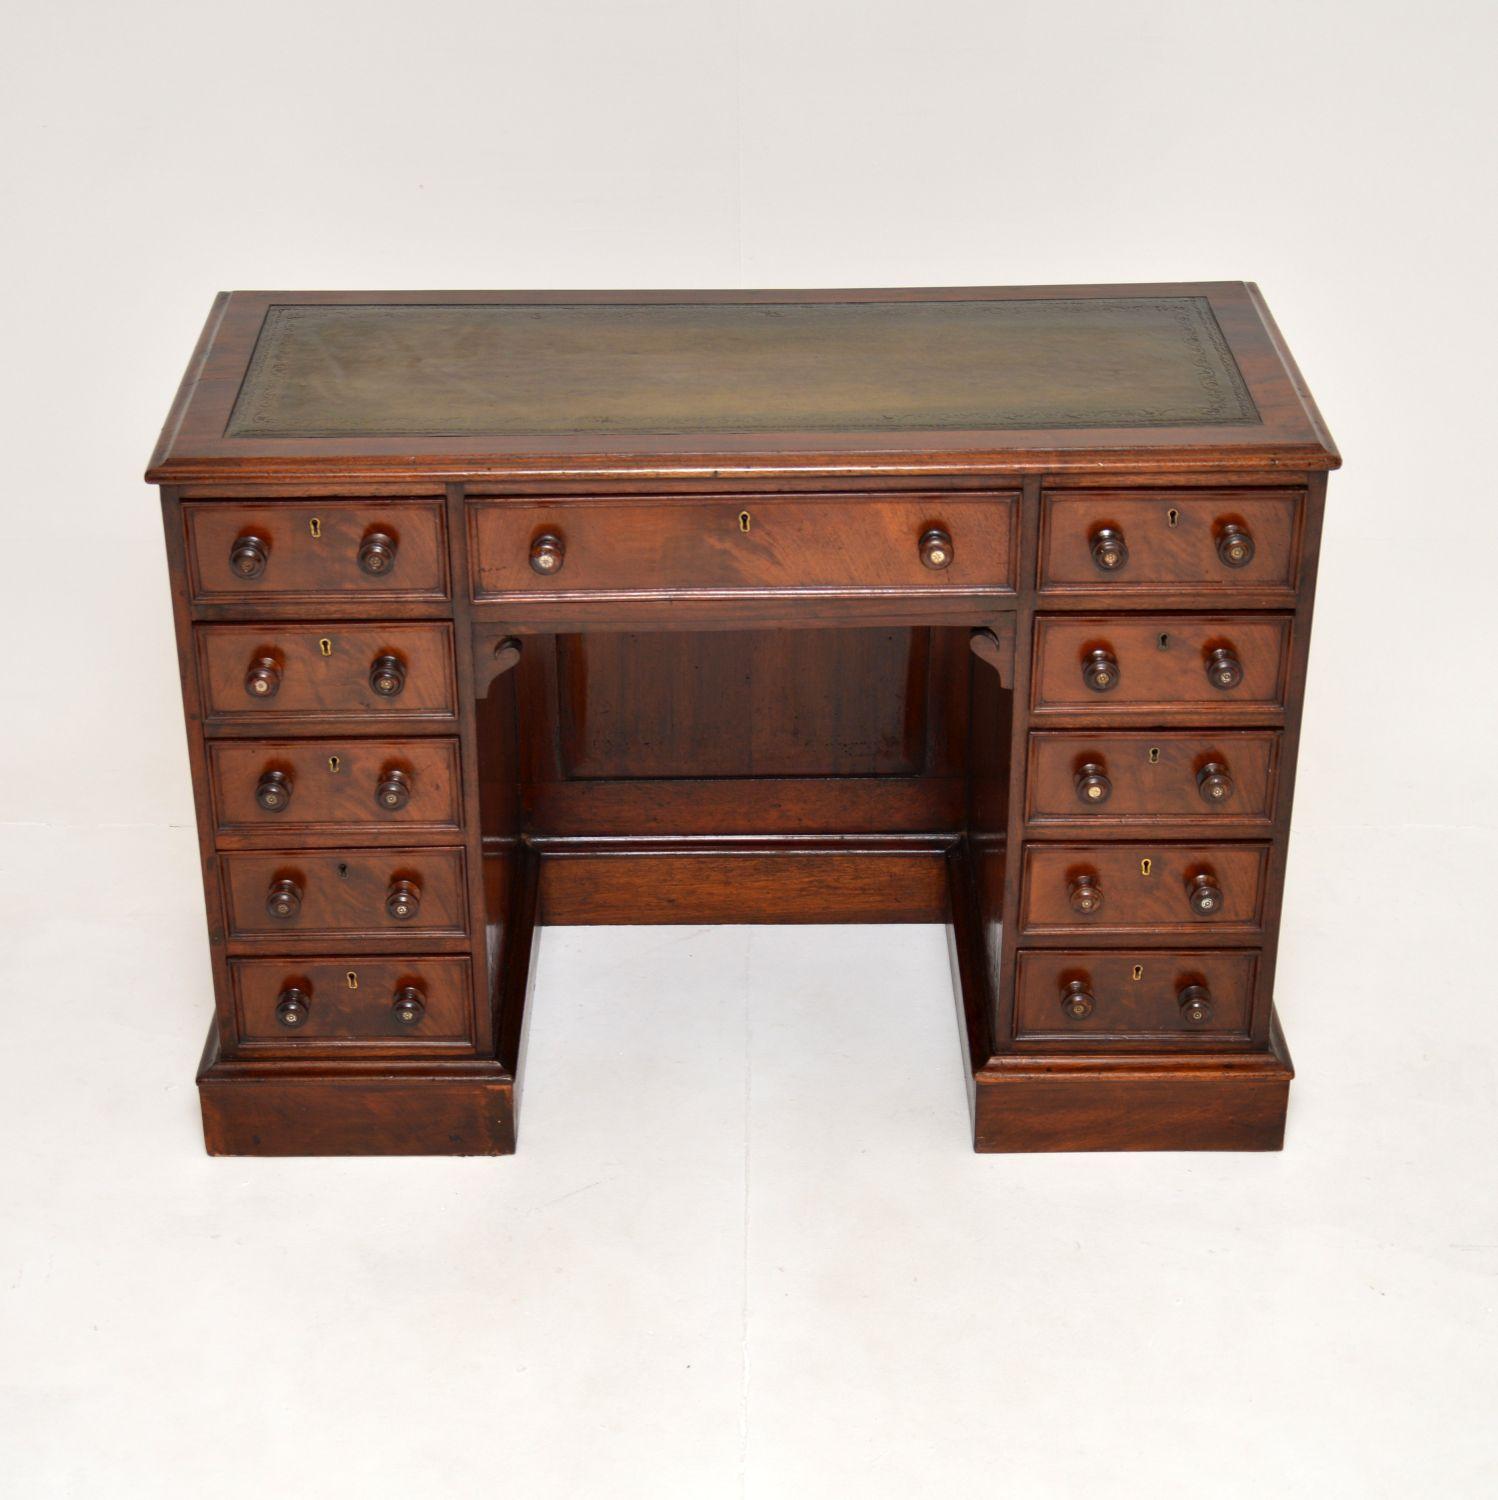 A wonderful antique Victorian leather top knee hole desk. This was made in England, it dates from around 1860-1880.

It is of superb quality and is a lovely size. This is all one piece with a built in knee hole giving rise to the term ‘knee hole’